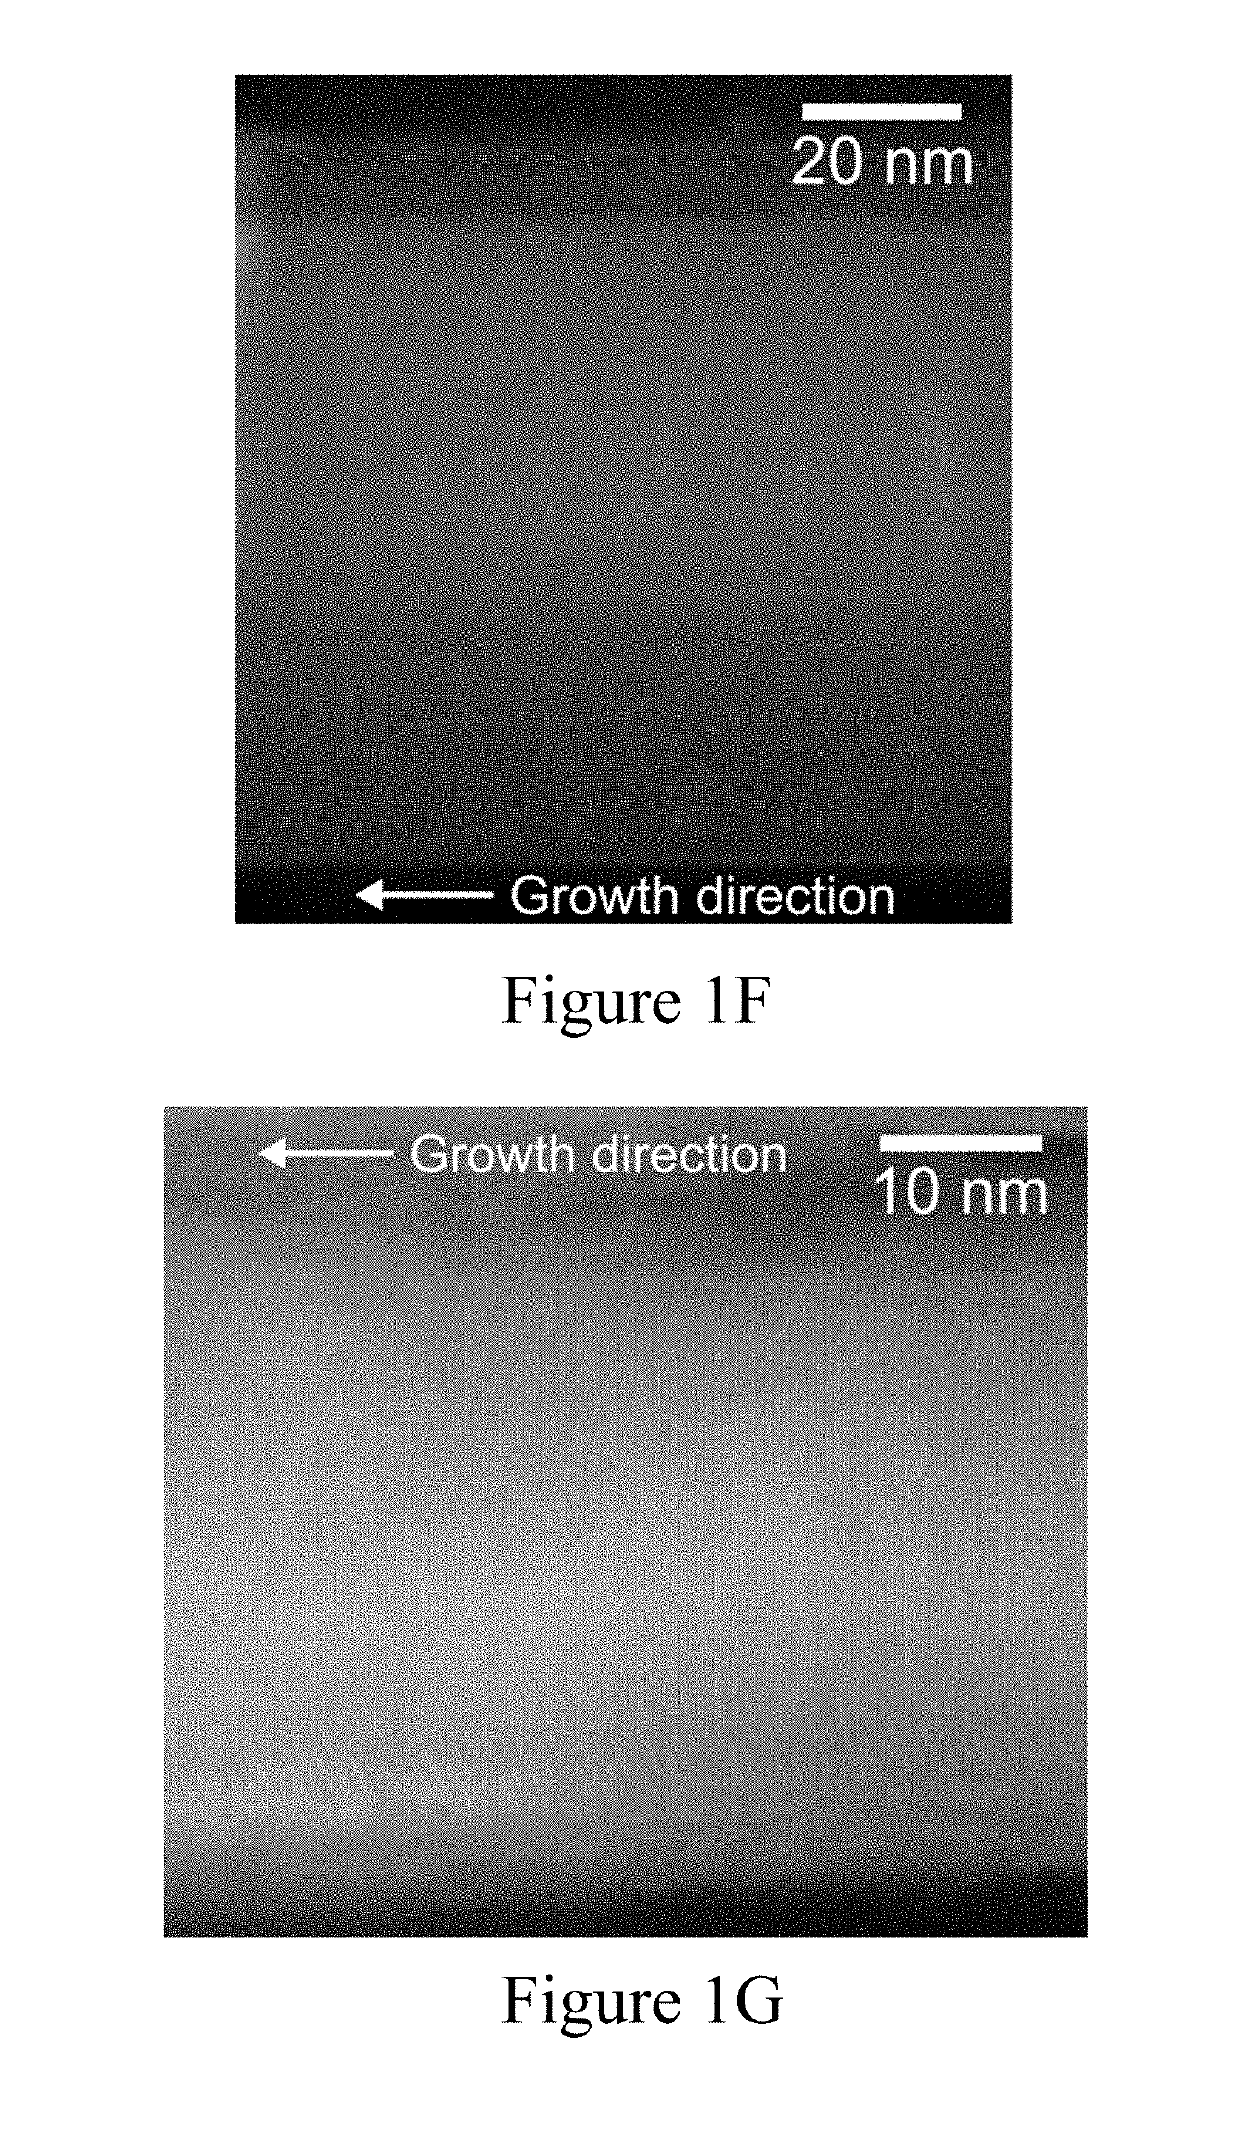 High efficiency visible and ultraviolet nanowire emitters